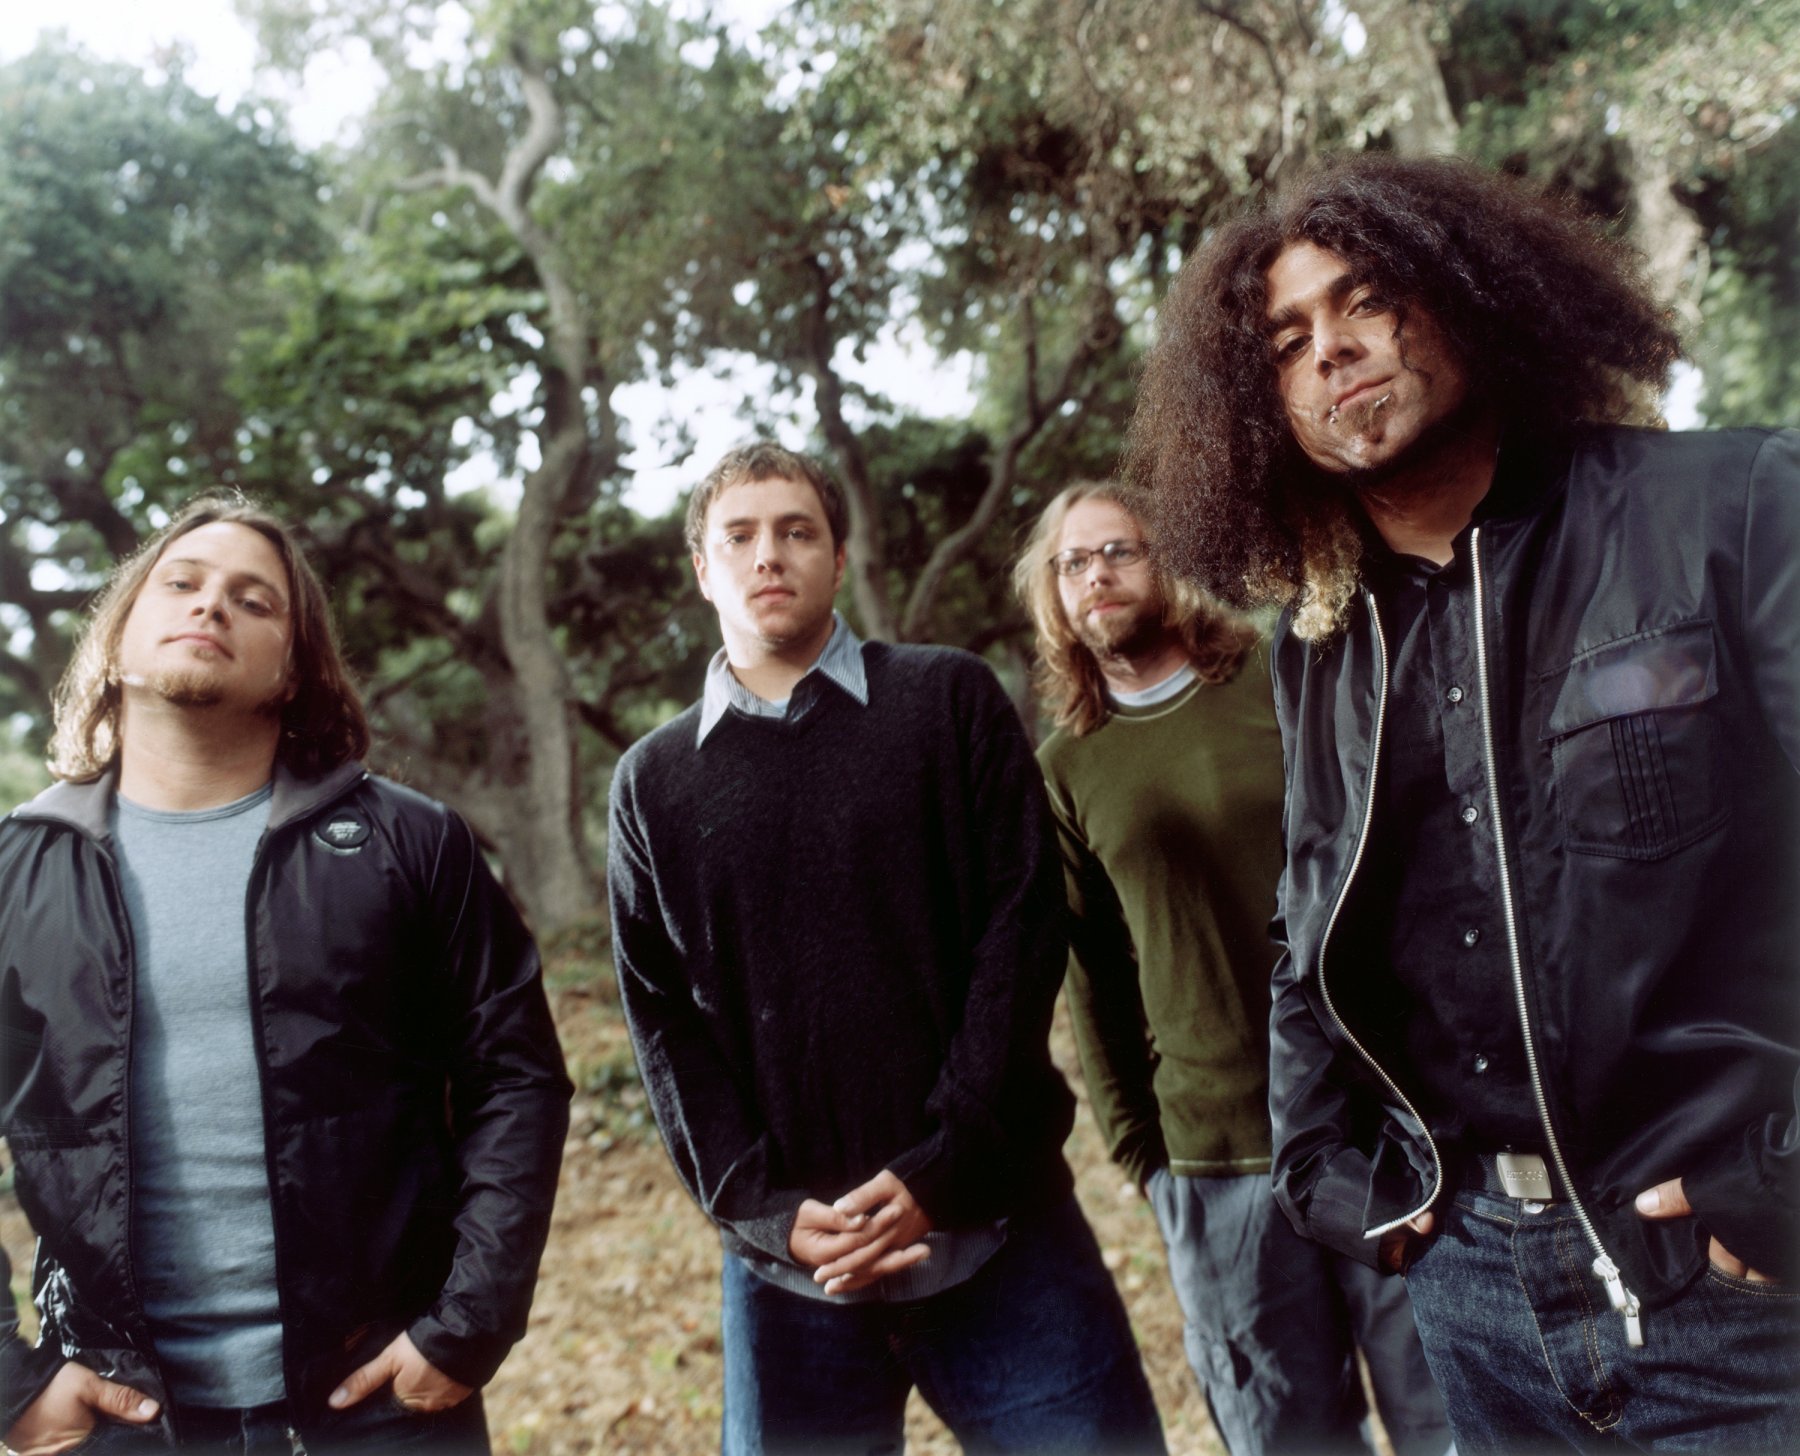 Coheed And Cambria HD wallpapers, Desktop wallpaper - most viewed